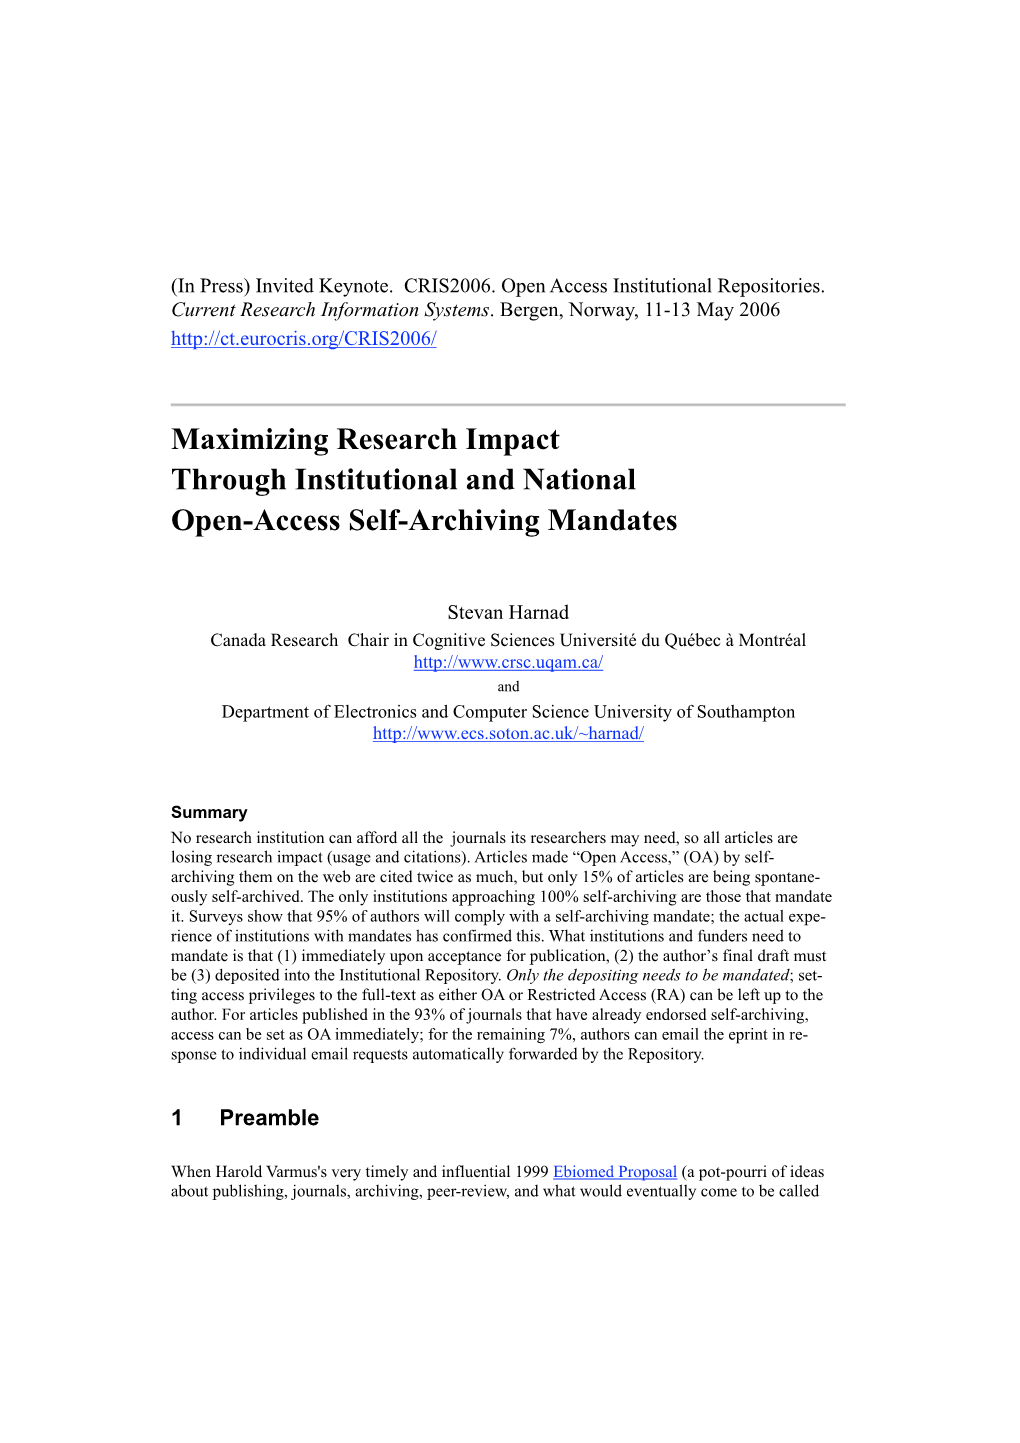 Maximizing Research Impact Through Institutional and National Open-Access Self-Archiving Mandates